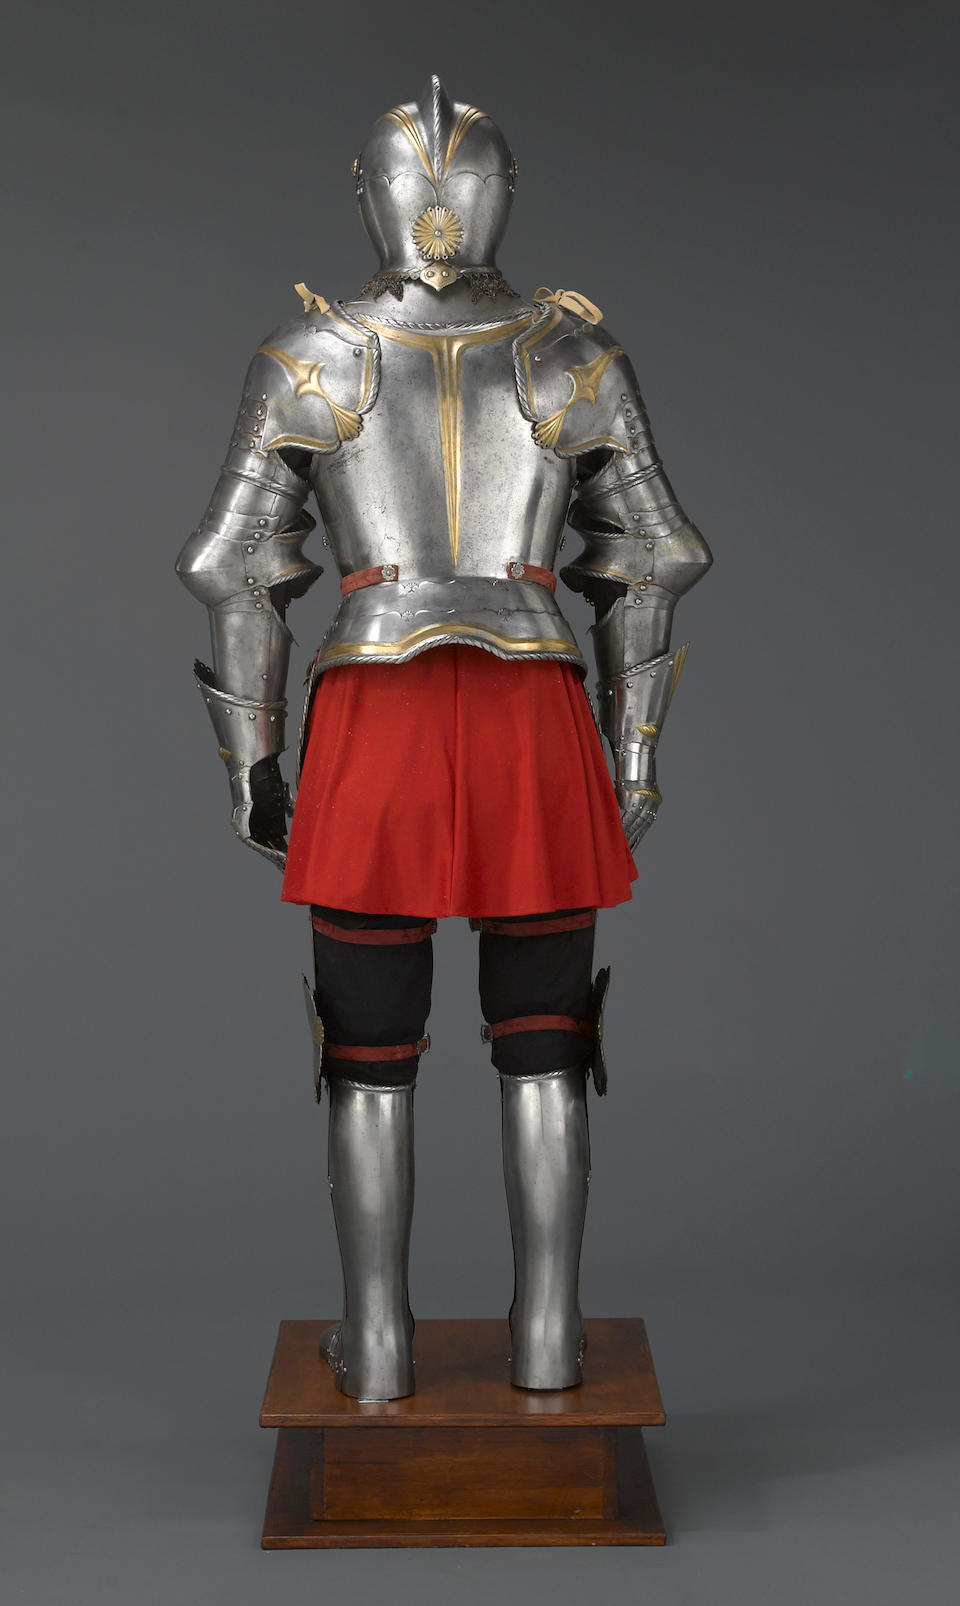 A fine 19th century full suit of armor in early 16th century style